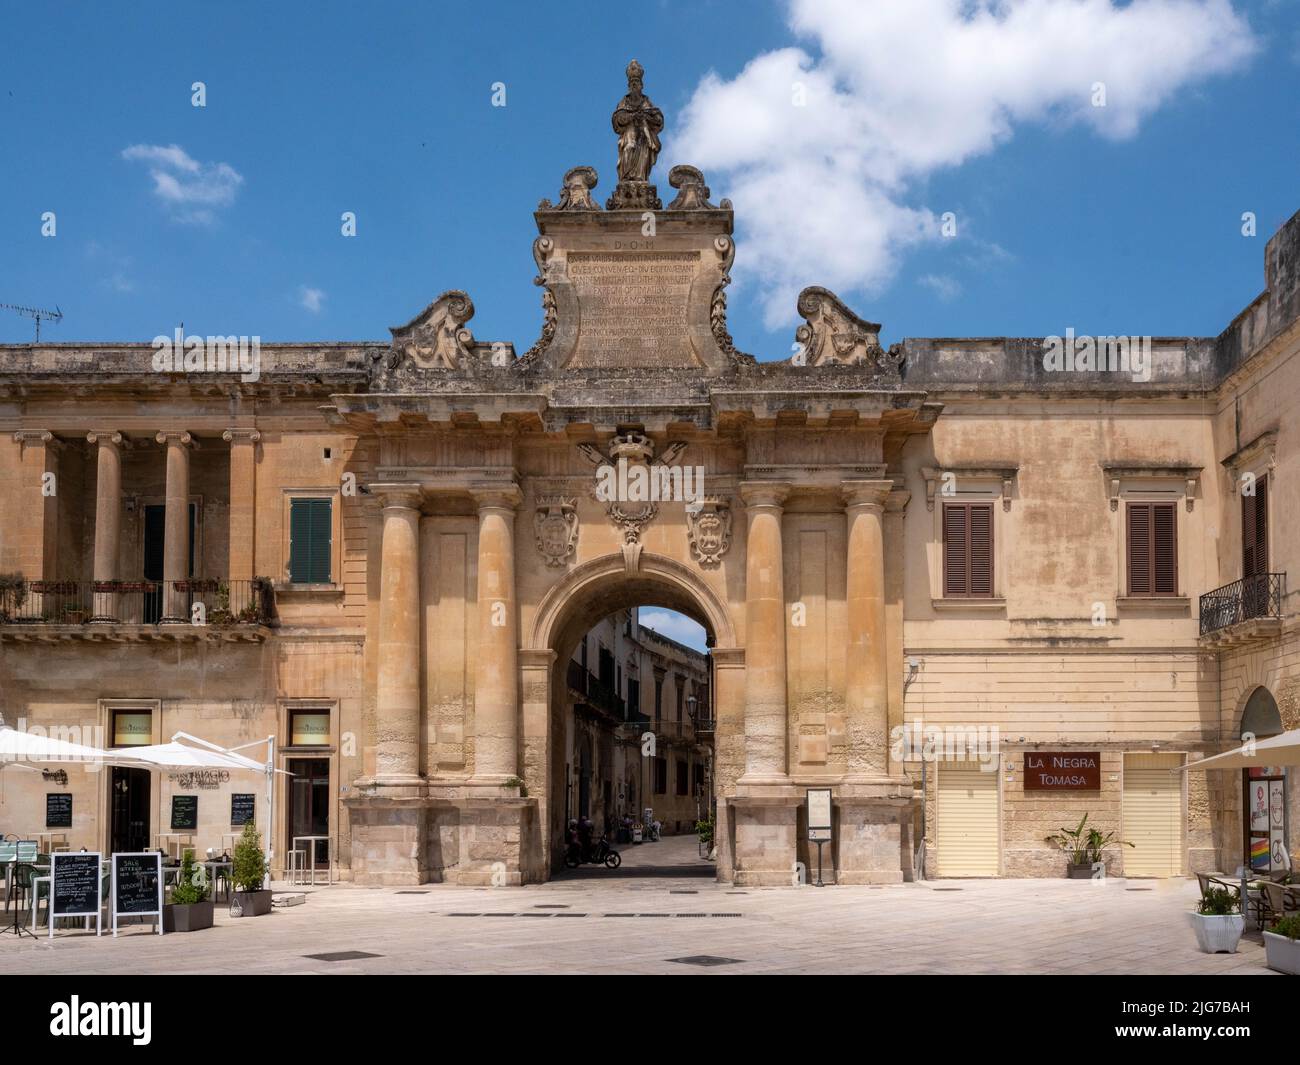 Porta San Biagio gate of Lecce, Puglia, Italy, one of three main entrances to the Old City in the high Baroque style Stock Photo